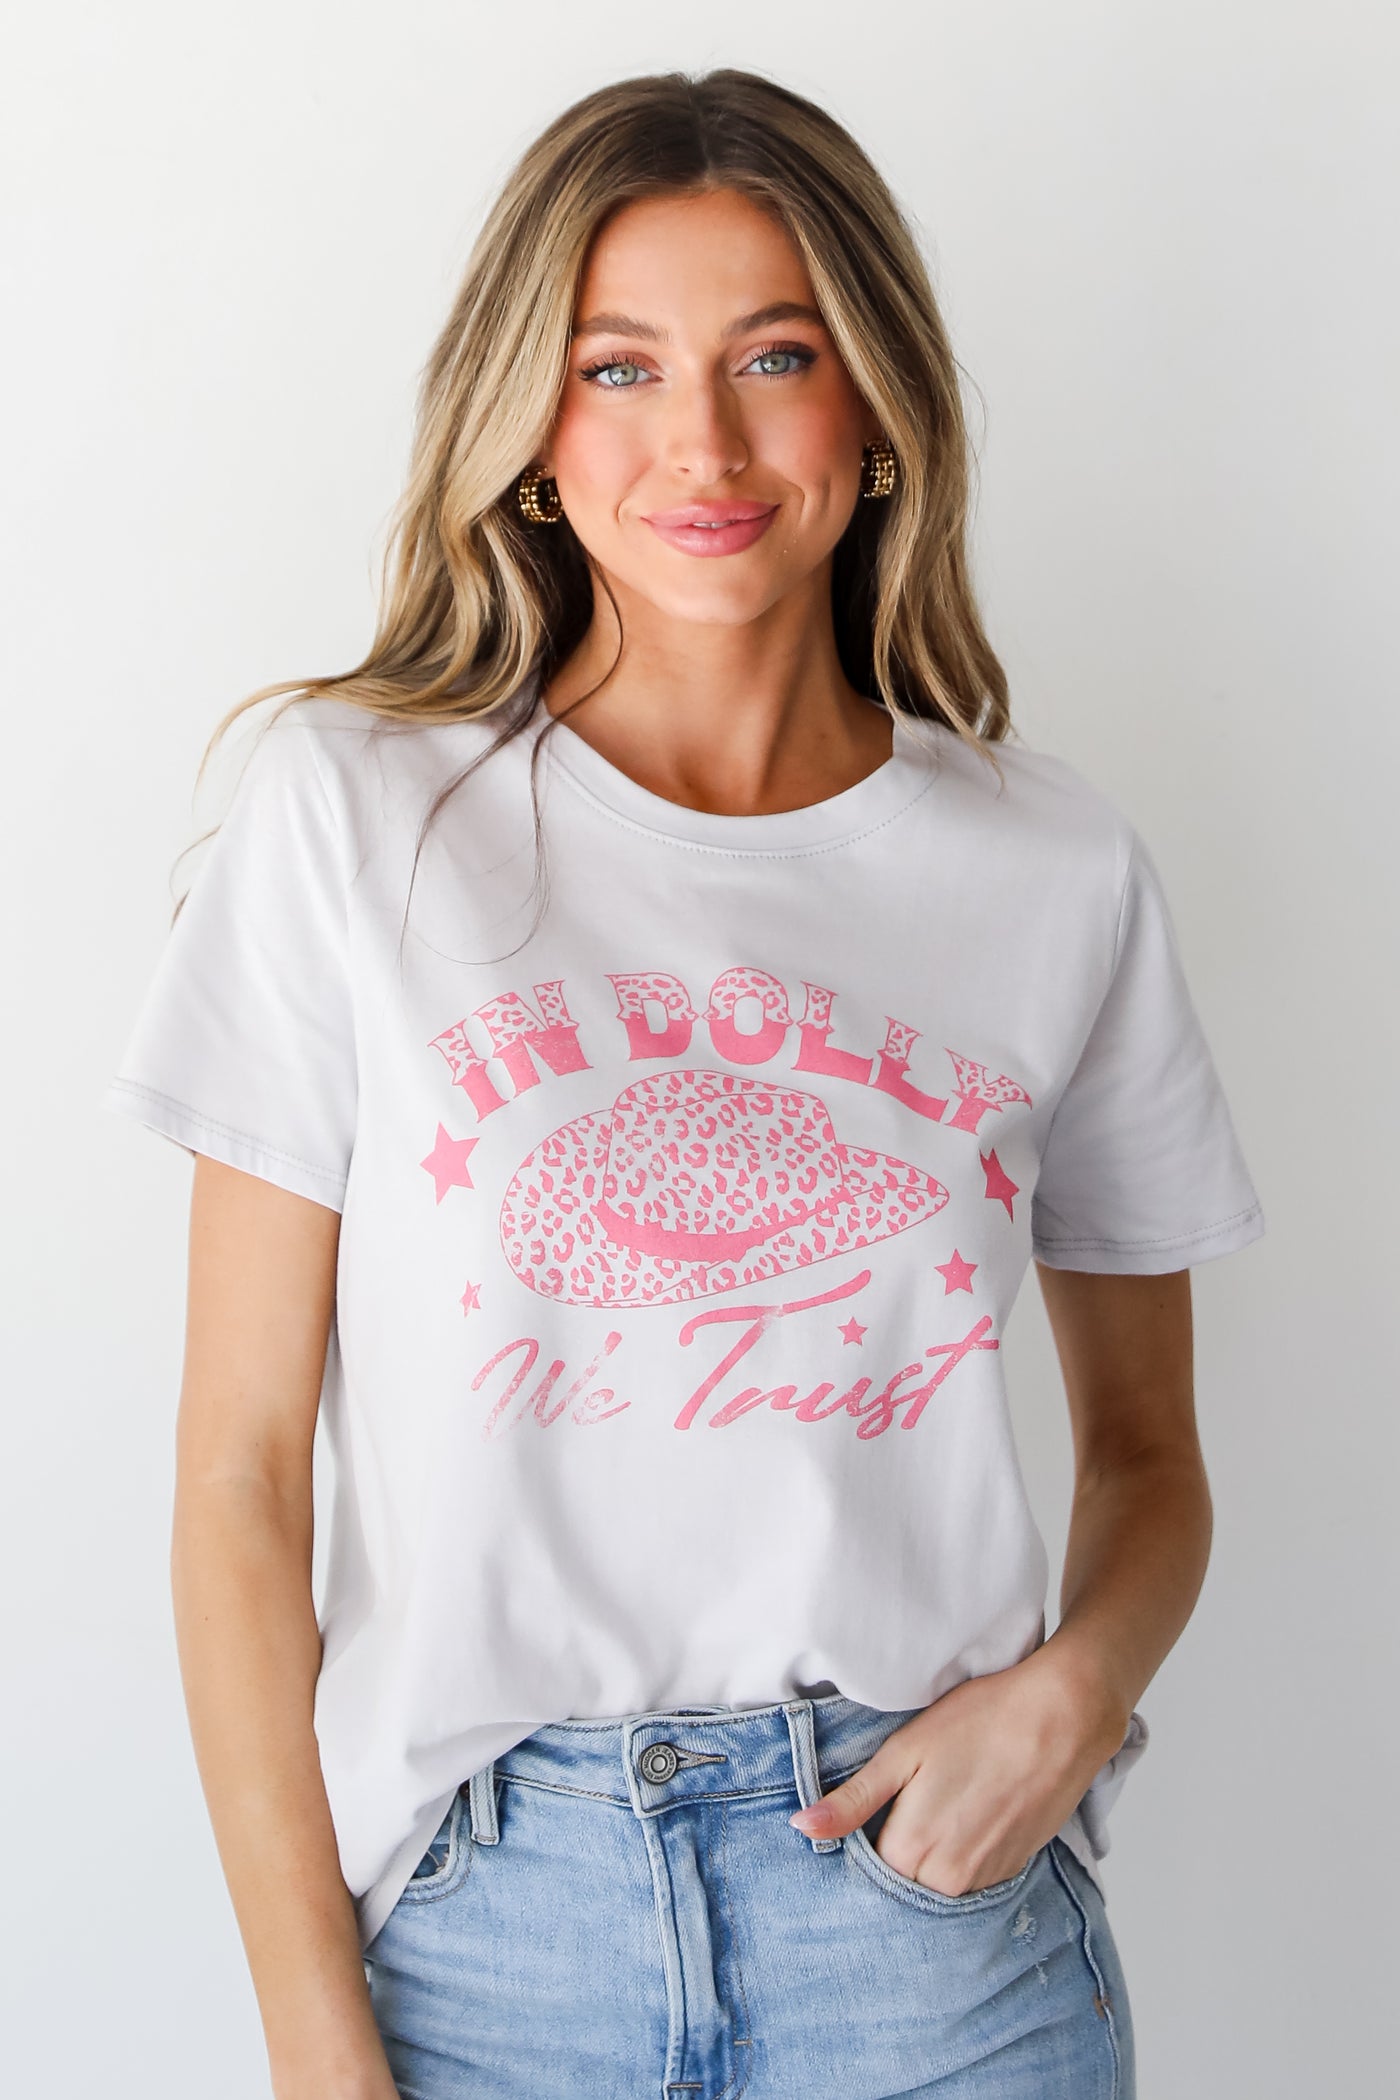 In Dolly We Trust Graphic Tee front view